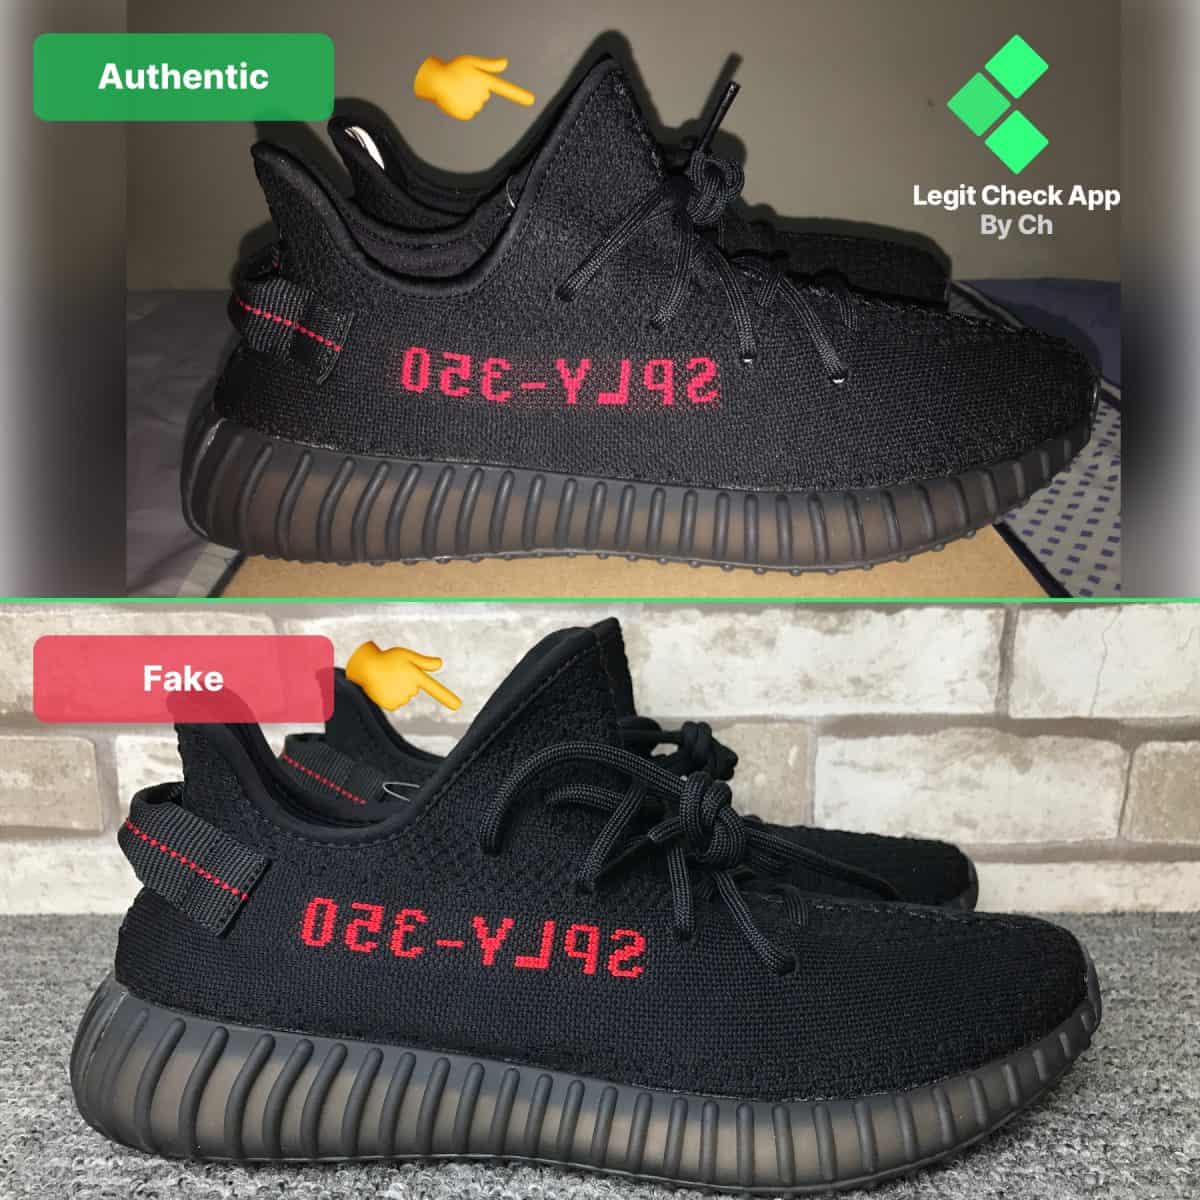 The Ultimate Real Vs Fake Yeezy Boost 350 V2 Bred (Black Red 